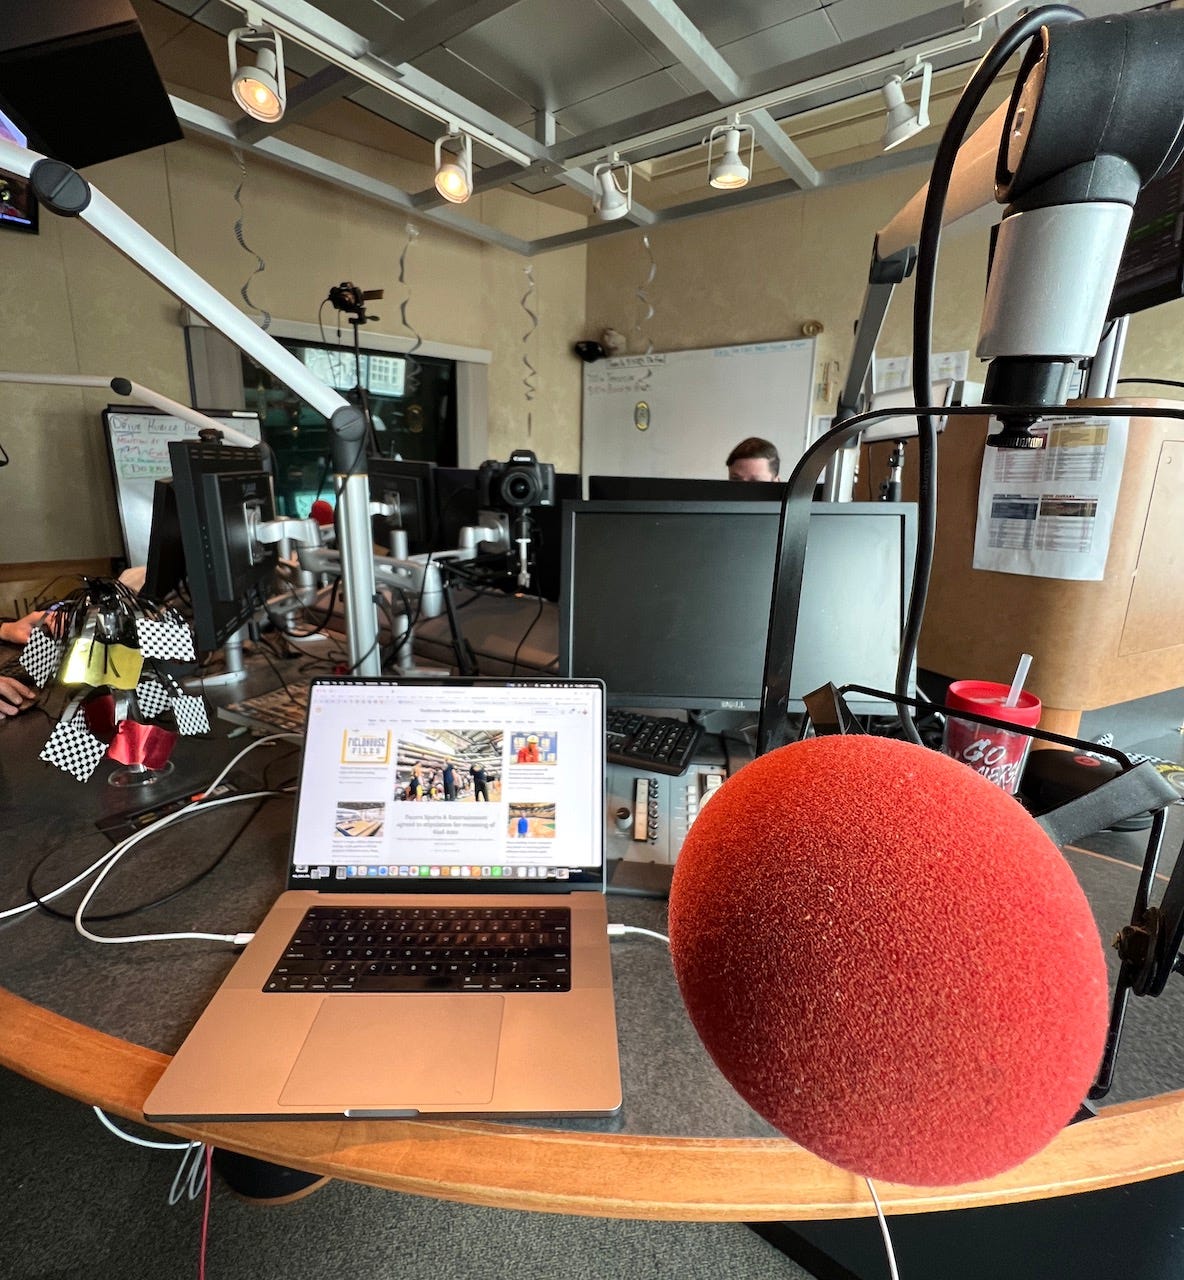 The first-person view from my seat at the radio station with my laptop on a desk and the microphone in front of me at The Fan.